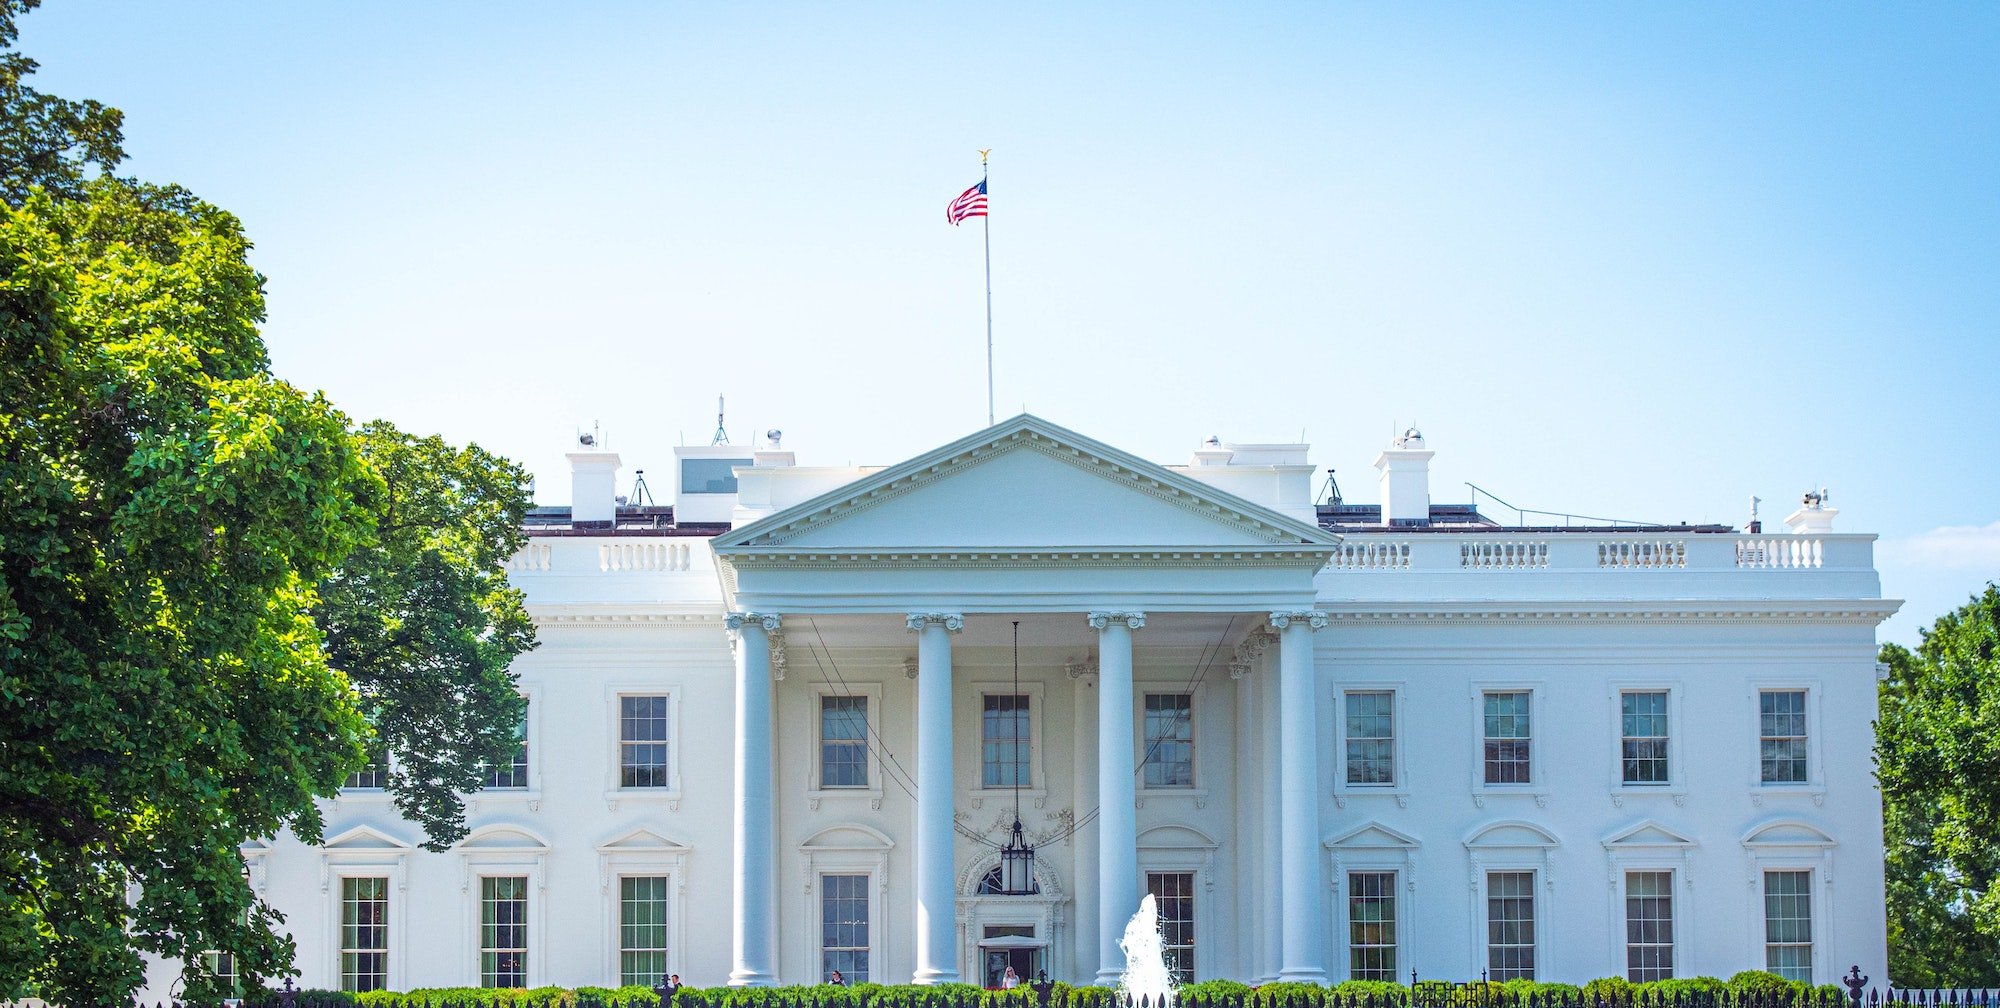 A photo of the White House in Washington, D.C.